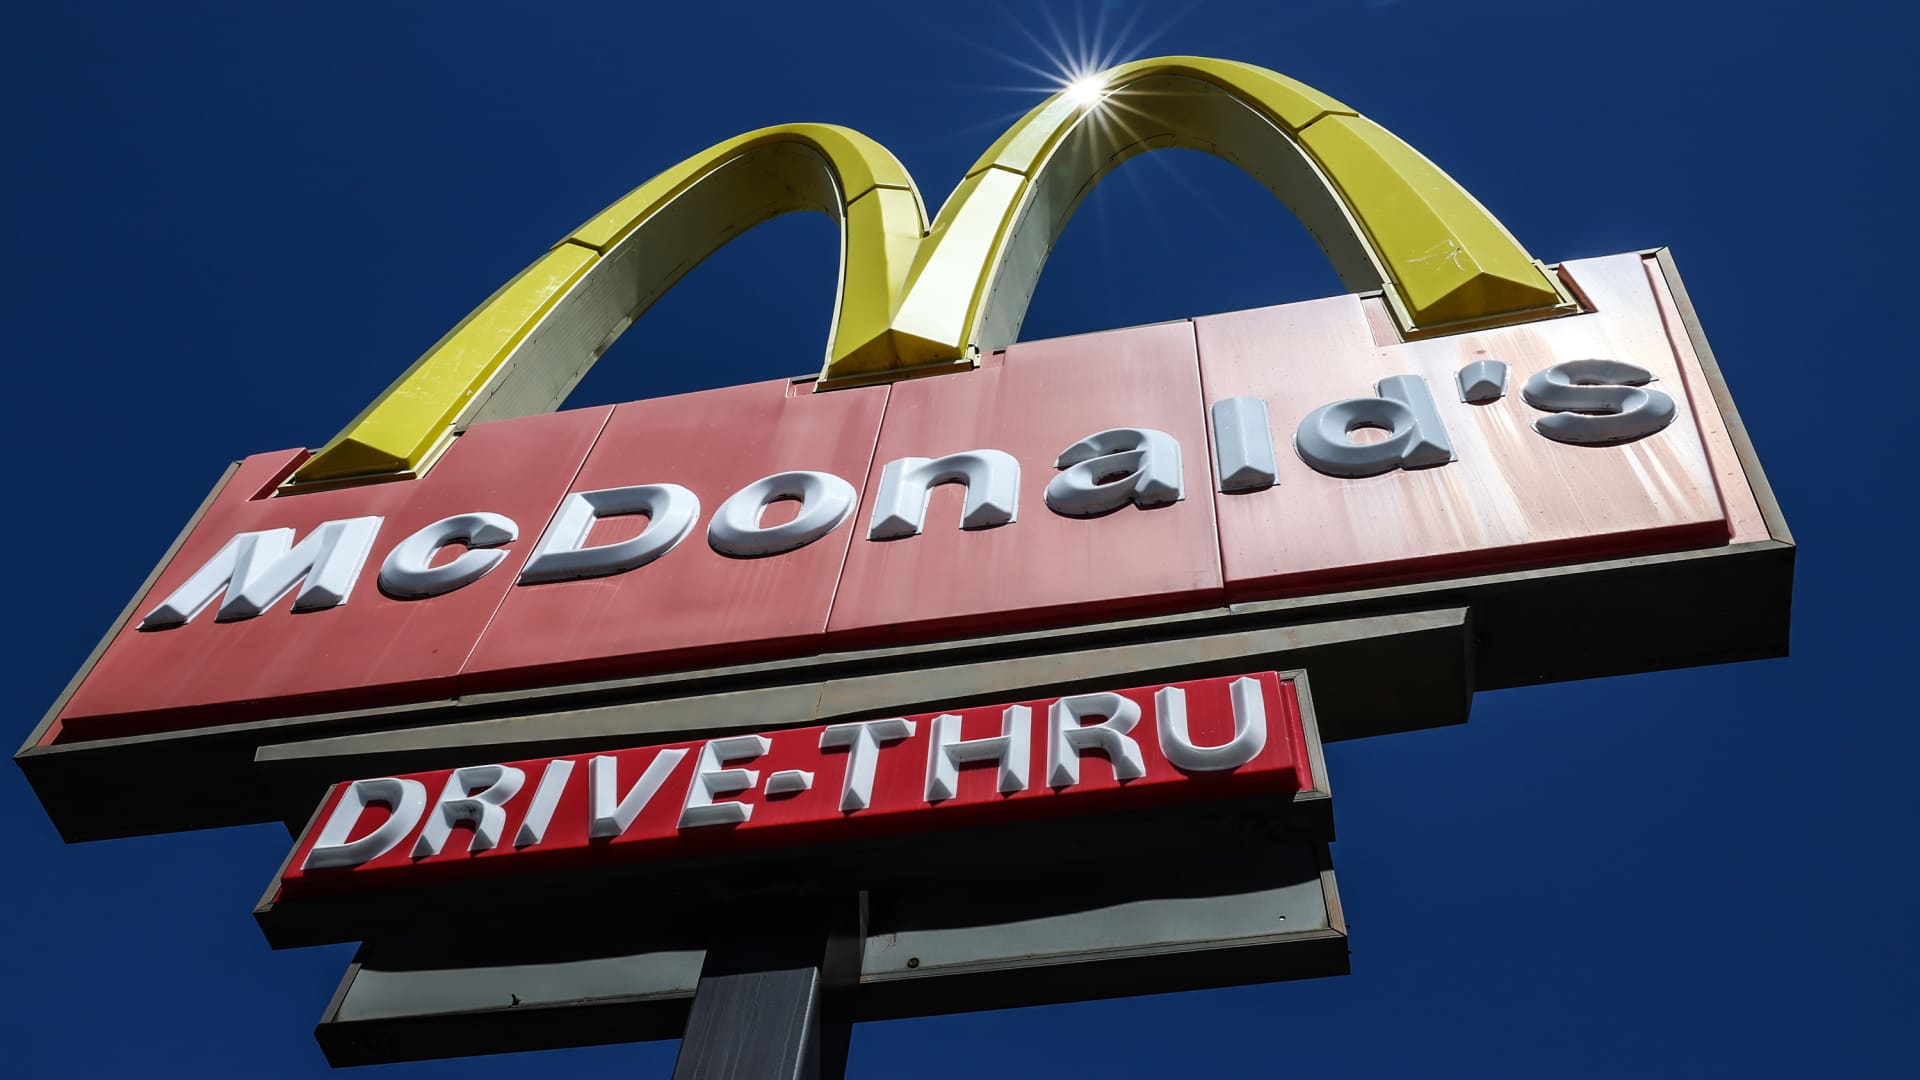 McDonald's Introduces $5 Value Meal to Boost Sales Amid Consumer Price Sensitivities